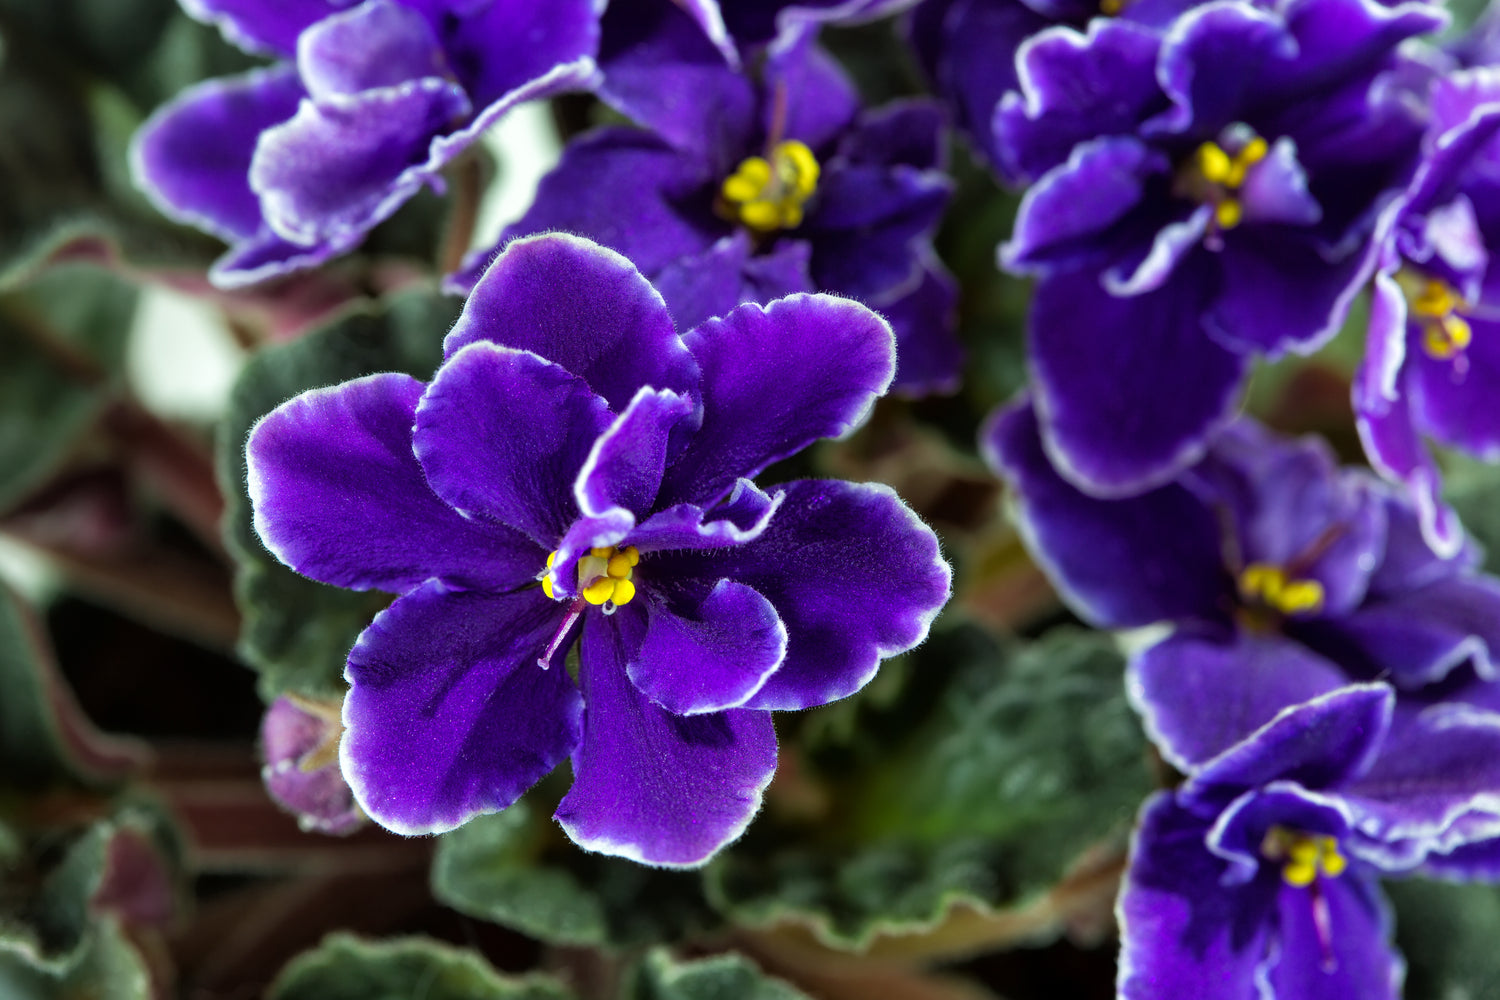 A purple African violet flower with delicate white lacy edges on the petals and yellow anthers. The flower is surrounded by other blooming heads, and the background shows the textured leaves and stems of the plant.